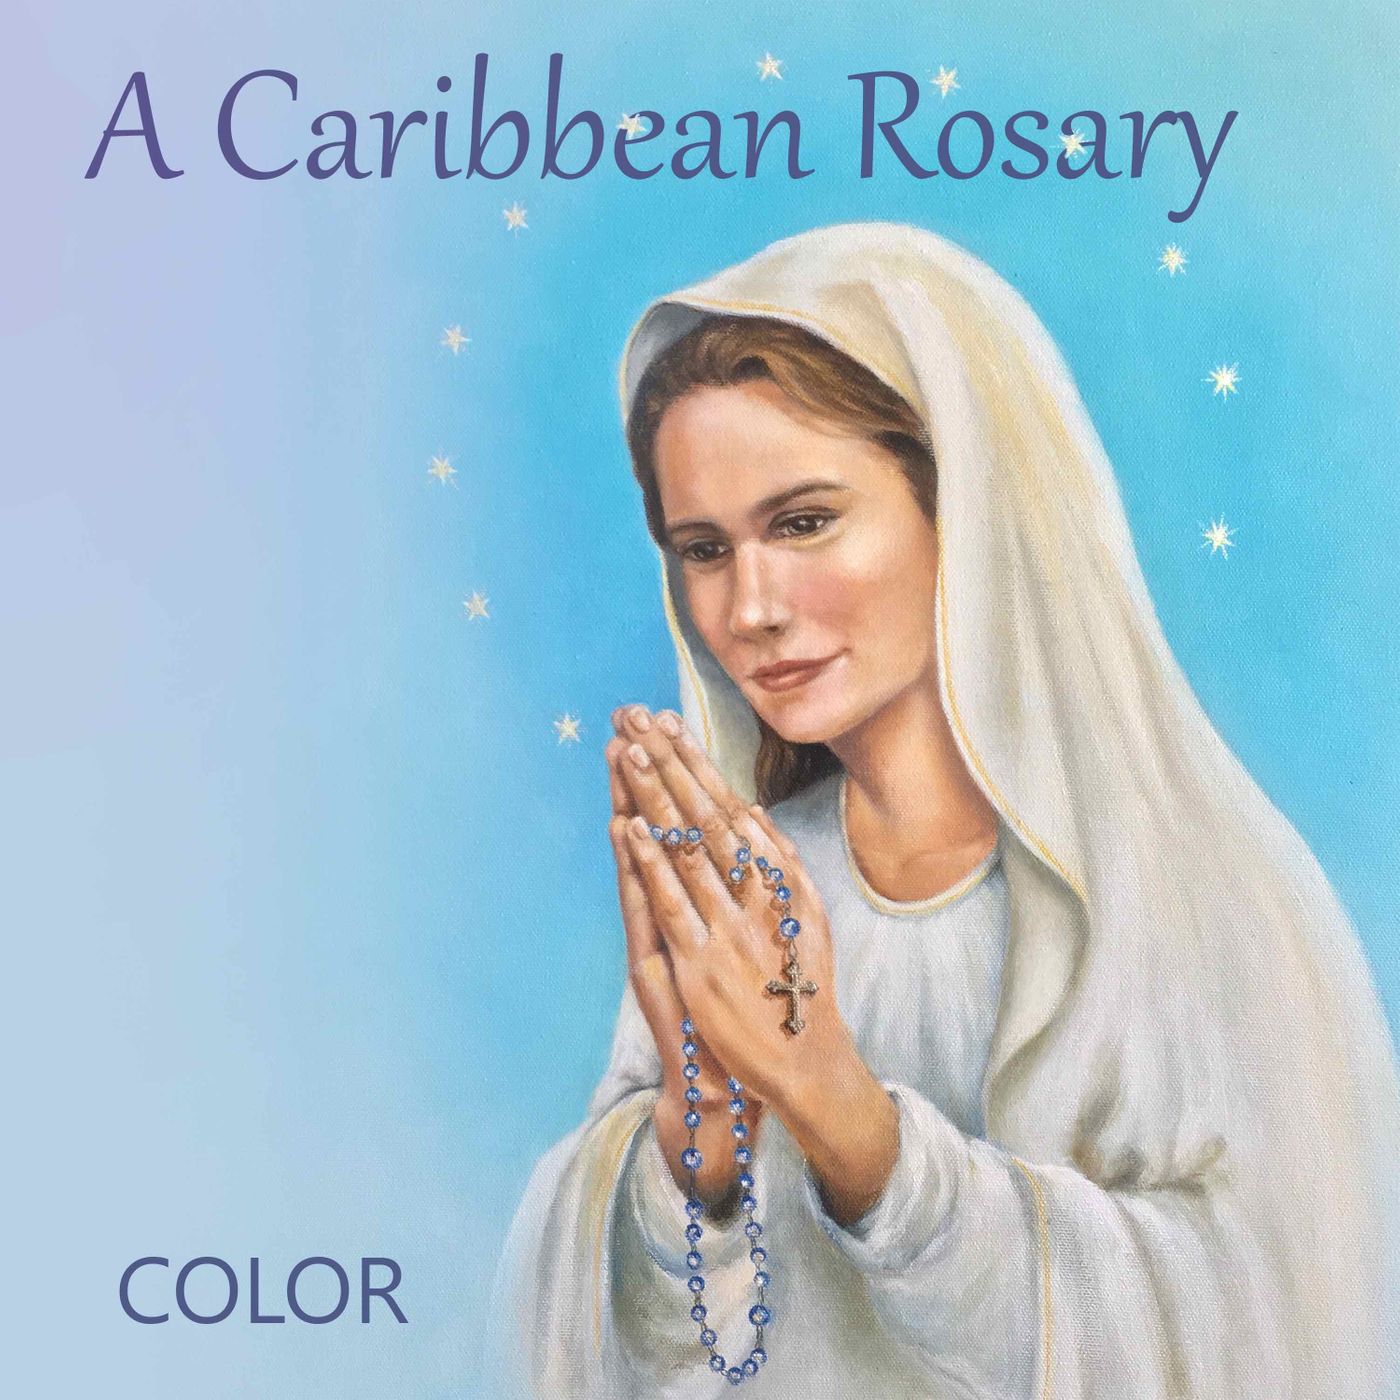 One Decade A Day: 5th Sorrowful Mystery (taken from A Caribbean Rosary)